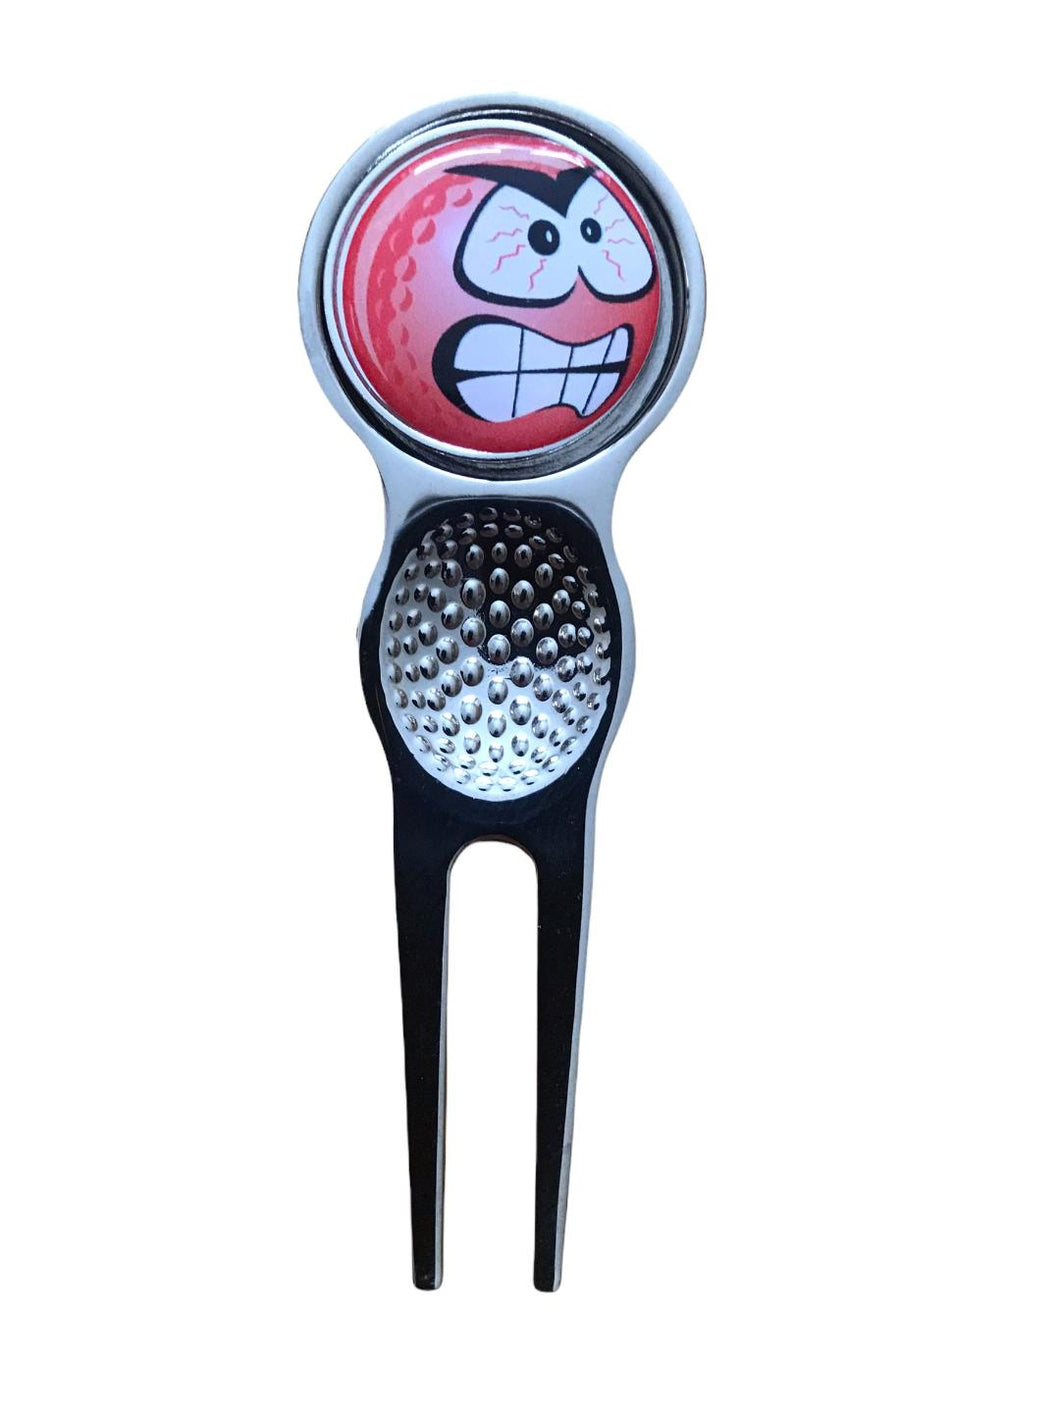 Pink Design Golf Divot Tool With Detachable Golf Ball Marker.  Laugh, Wink, Happy, Crazy, Angry.